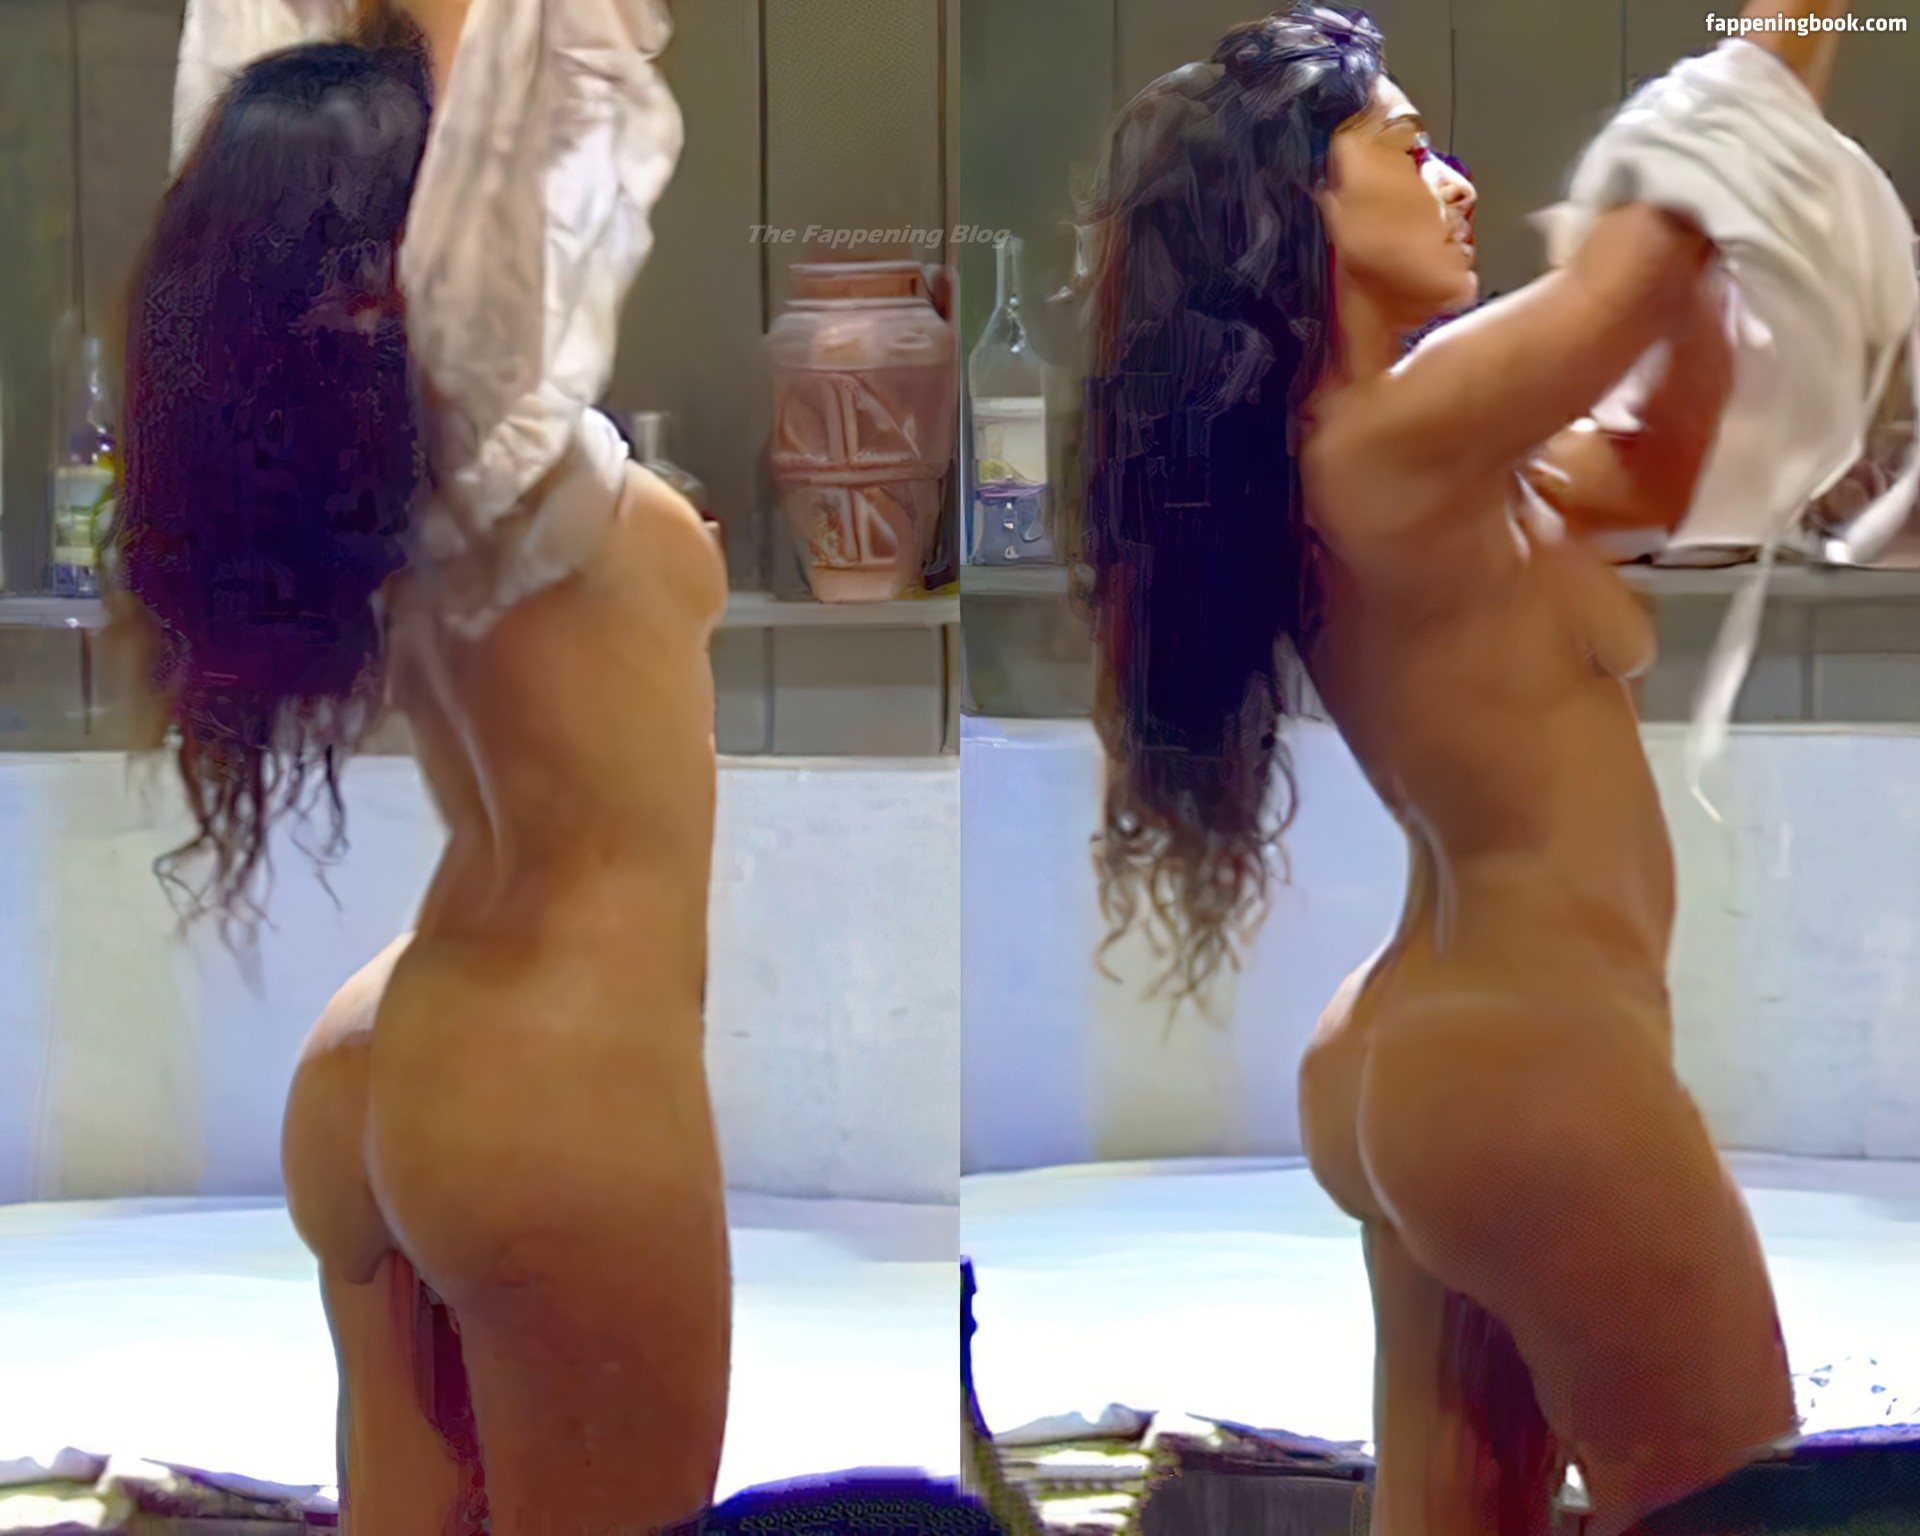 Juliana Paes Nude The Fappening Photo Fappeningbook